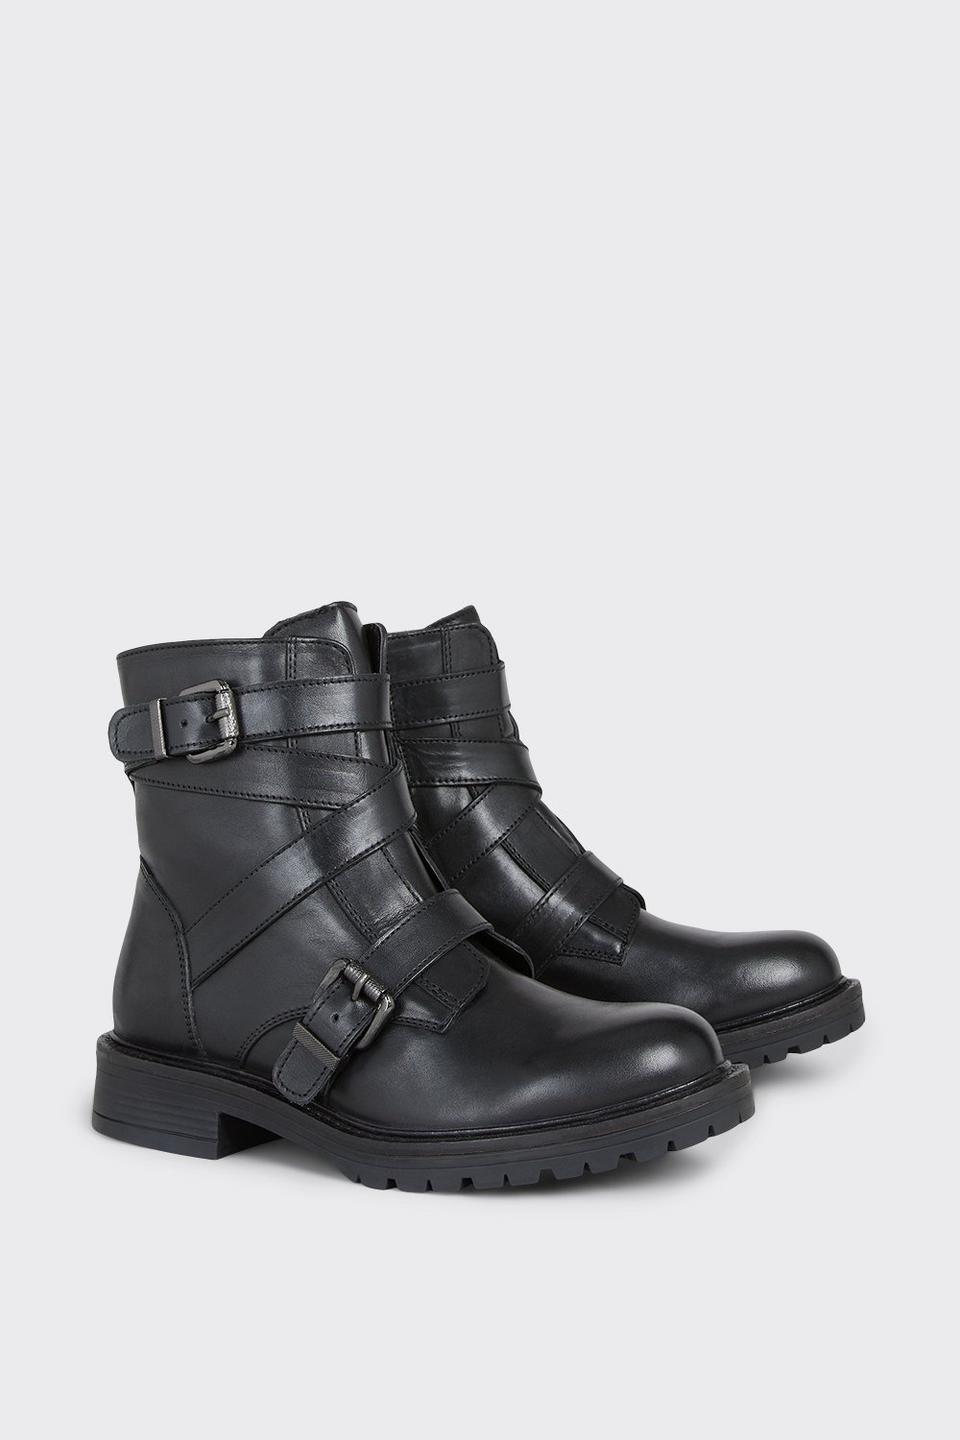 Boots | Good For The Sole: Rowan Double Strap Leather Biker Boots ...